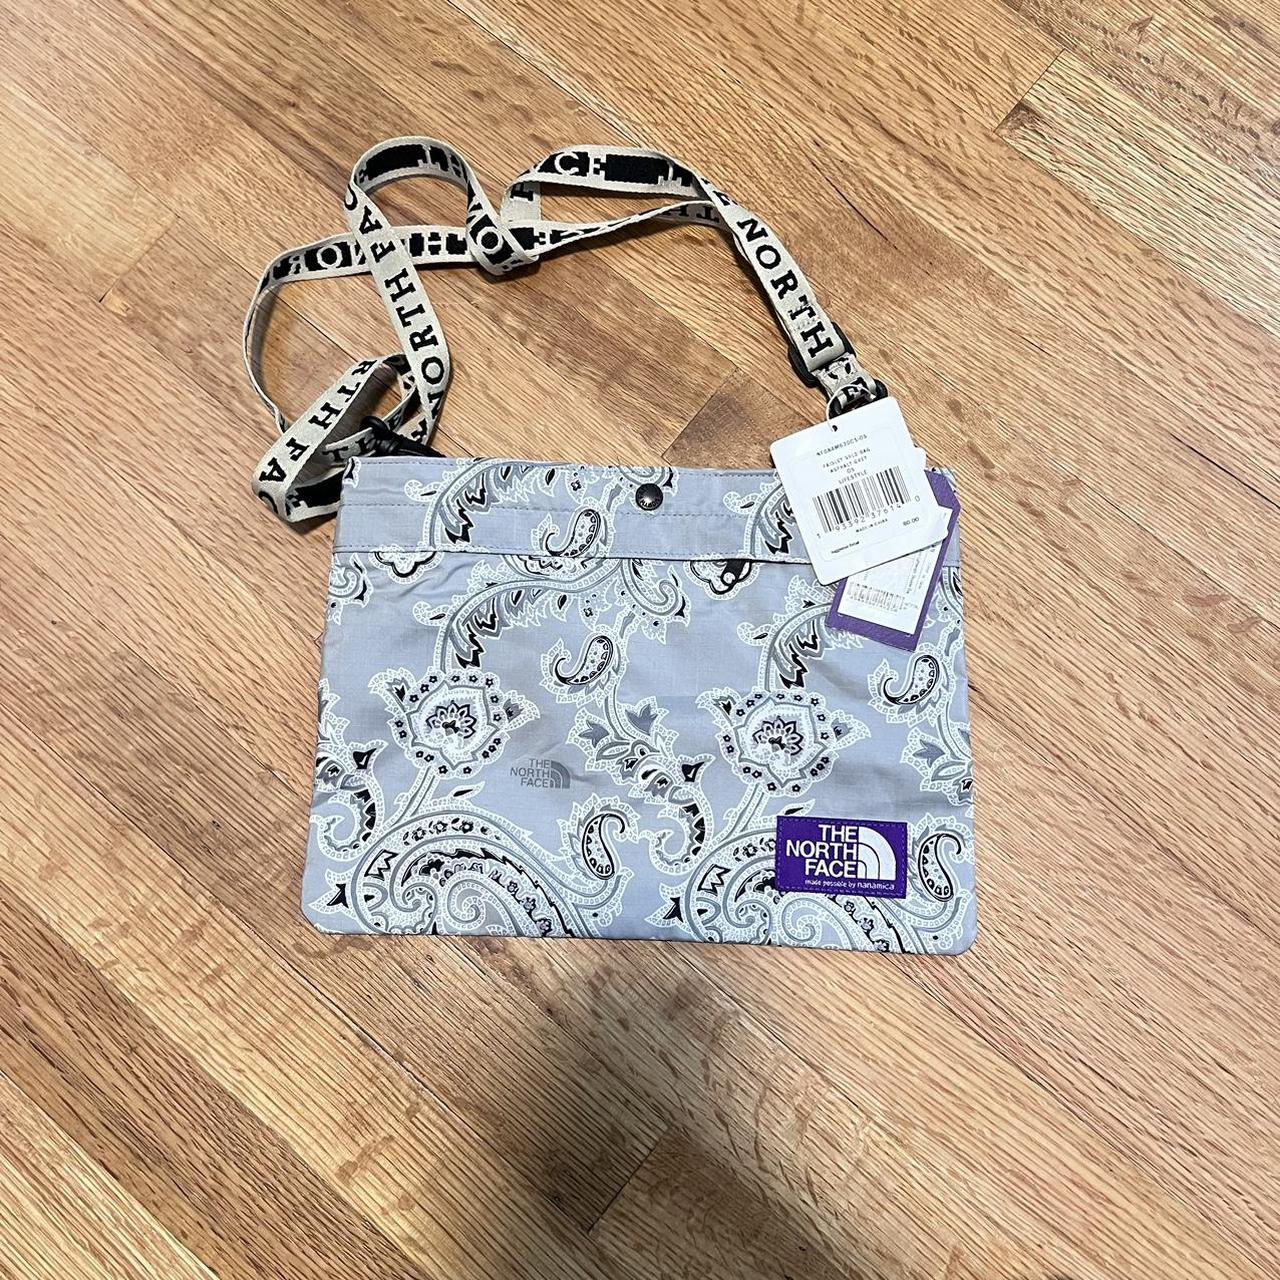 The North Face Purple Label Men's Grey and Purple Bag